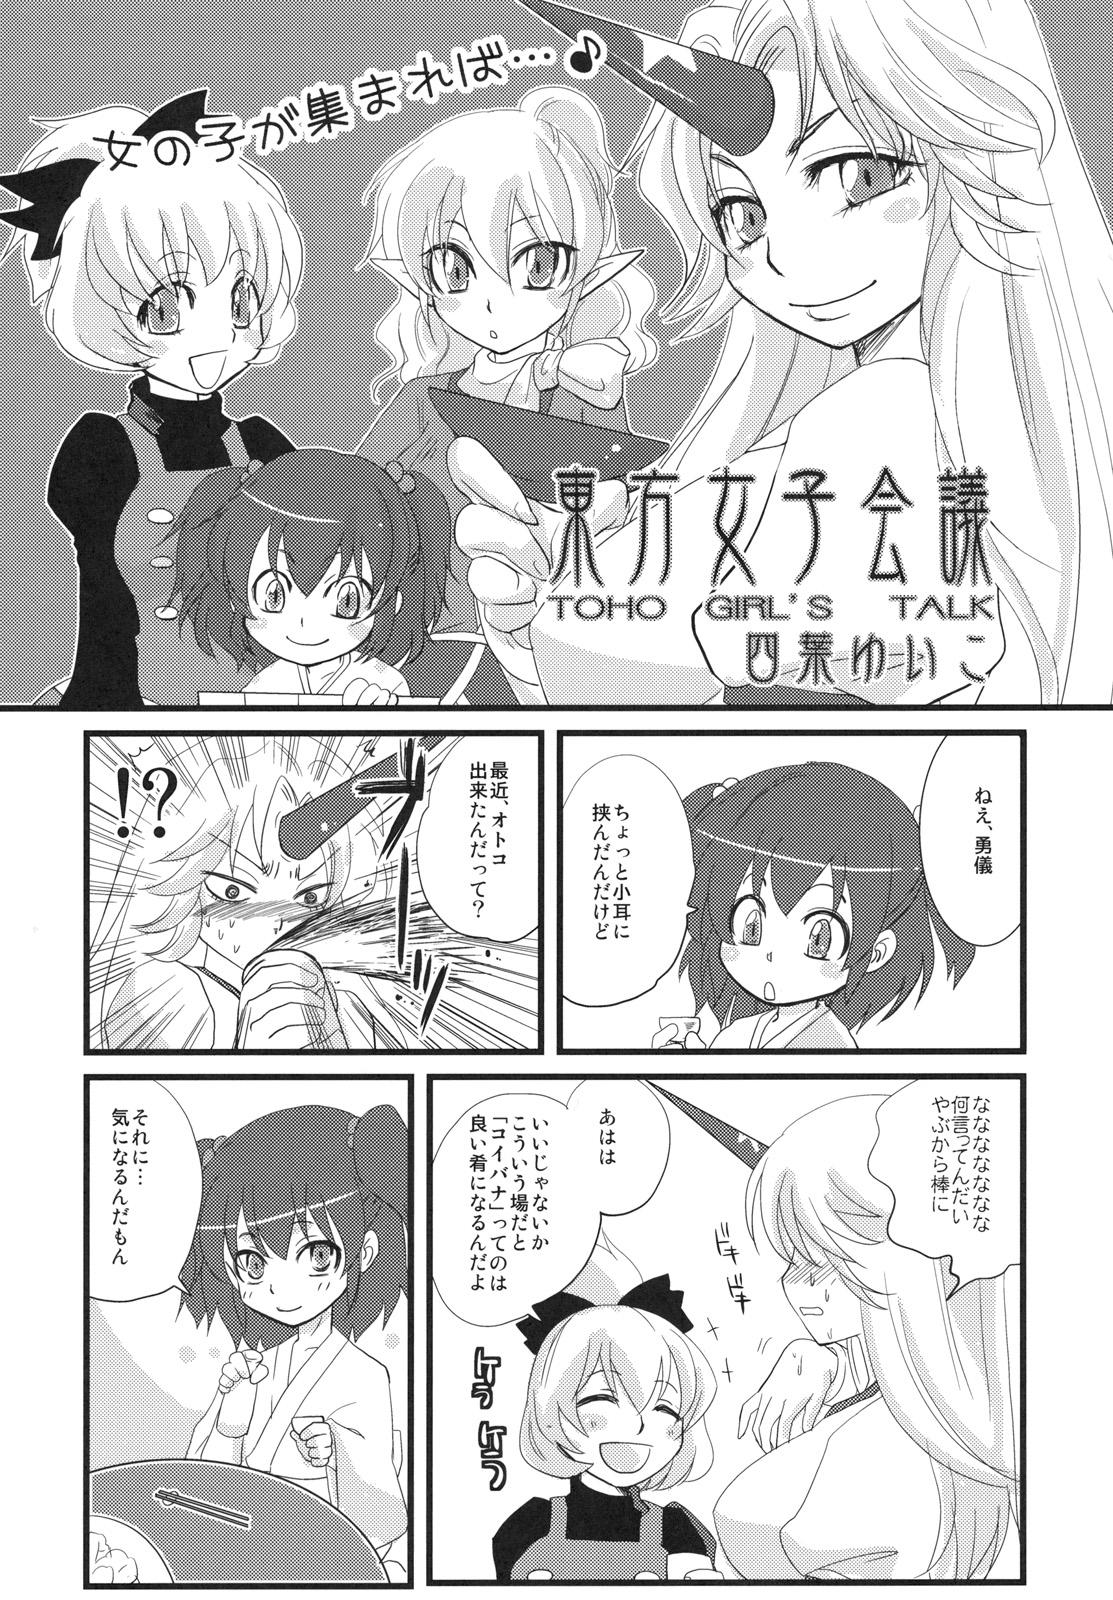 Story Touhou Under the Shrine - Touhou project Couples - Page 5